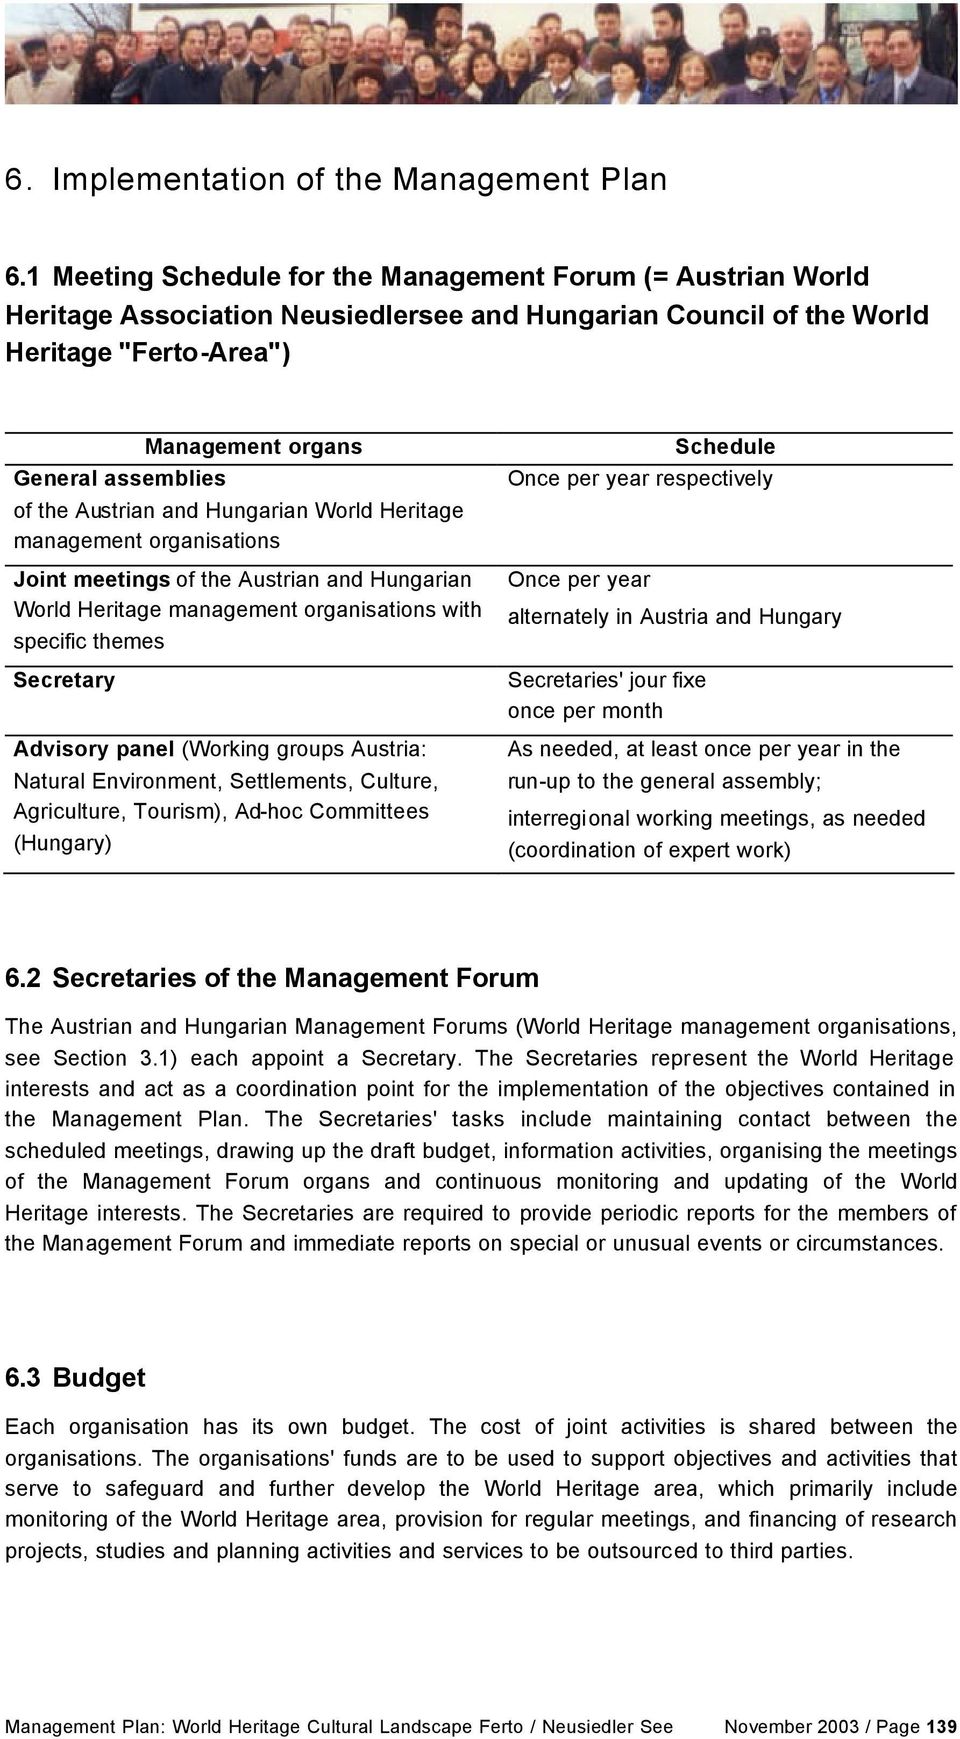 Austrian and Hungarian World Heritage management organisations Joint meetings of the Austrian and Hungarian World Heritage management organisations with specific themes Secretary Advisory panel